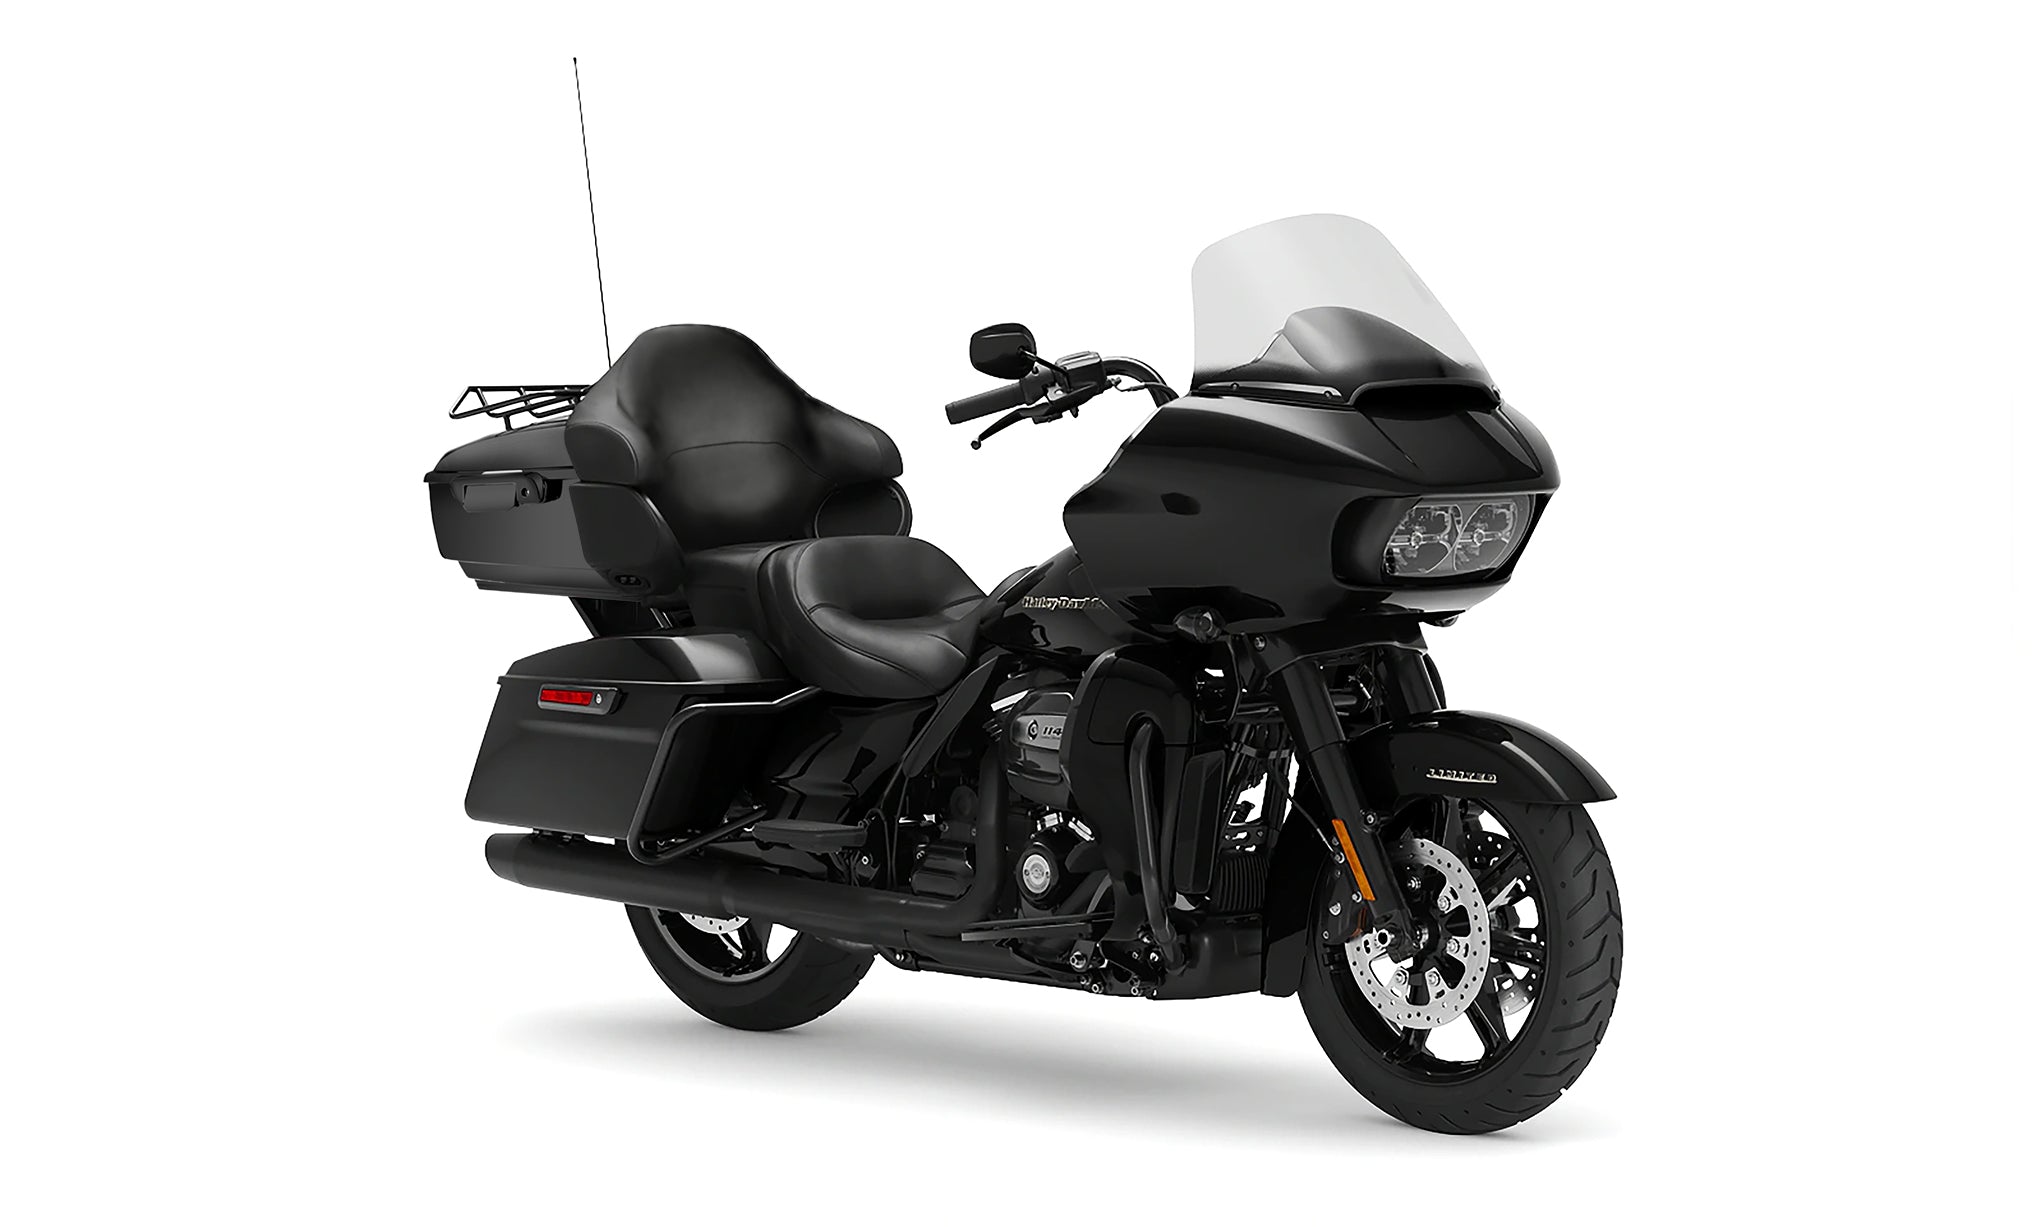 Viking Premium Tour Pack Backrest Pad For Harley Electra Glide Bag on Bike View @expand